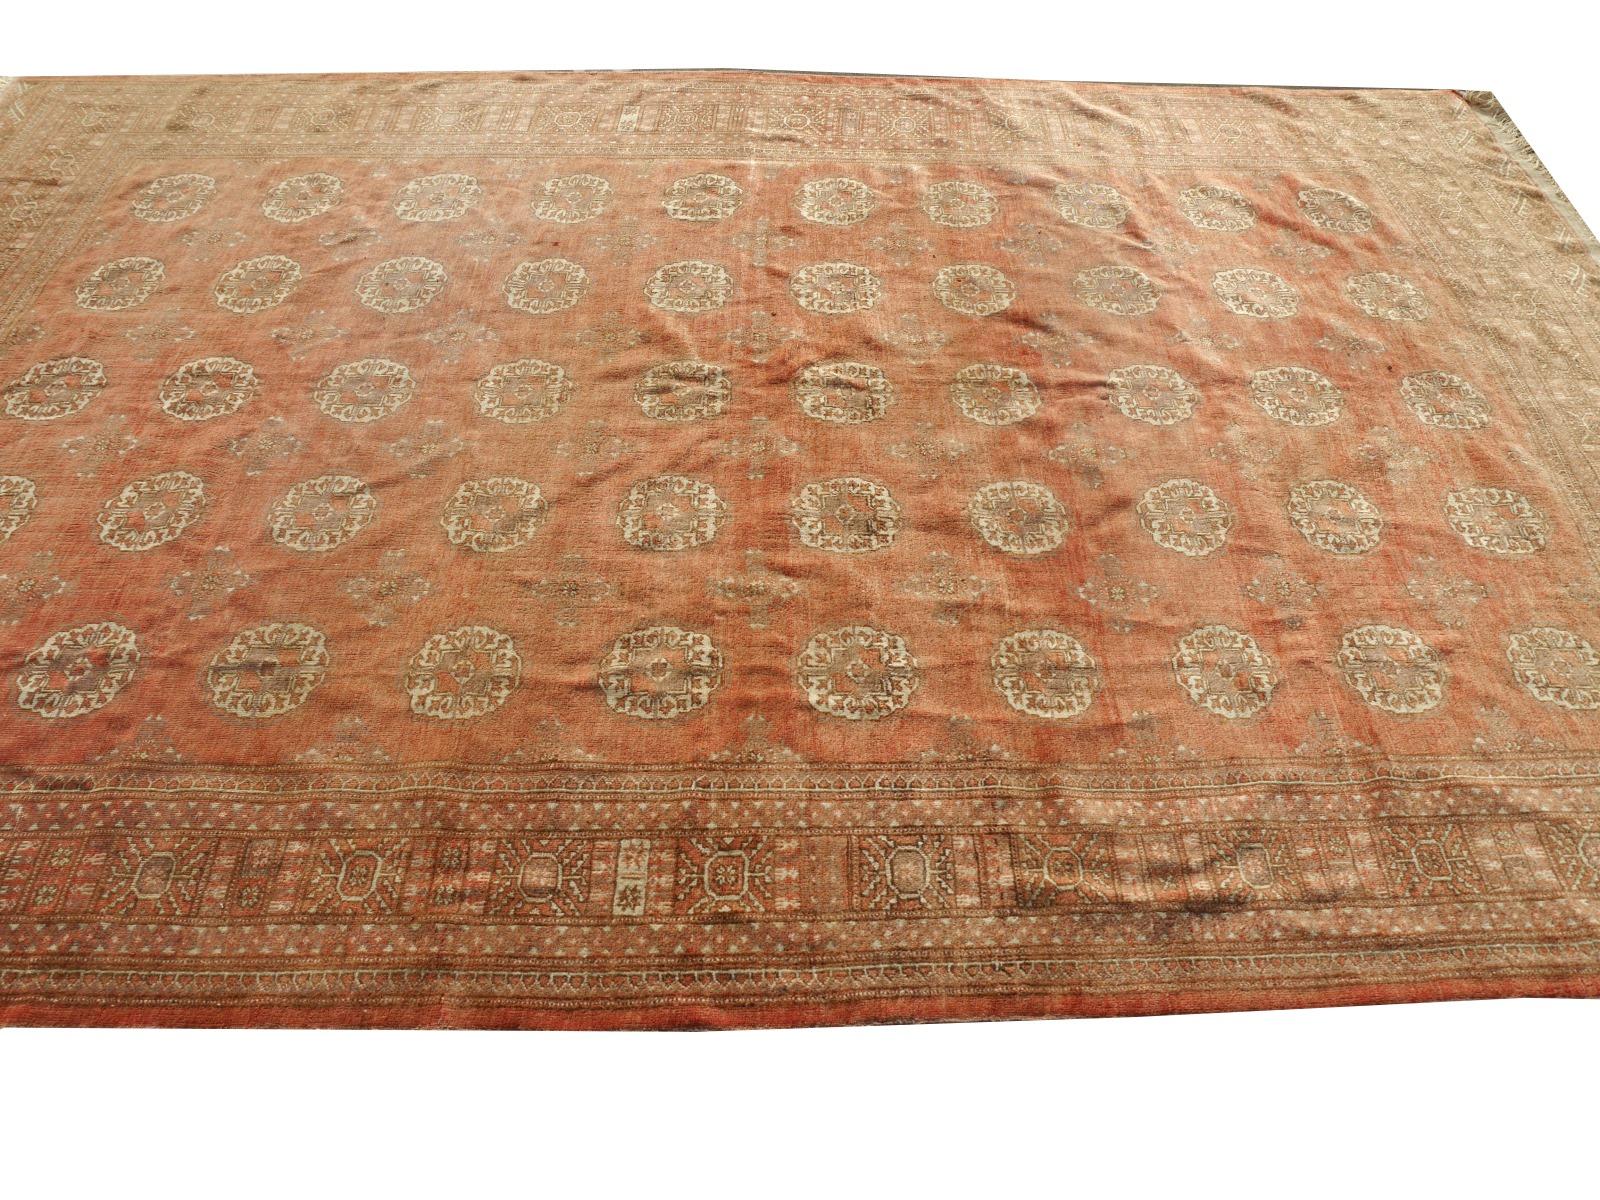 Ersari Rug Tribal Turkoman Hand Knotted Semi Antique Carpet Muted Faded Low Pile For Sale 4